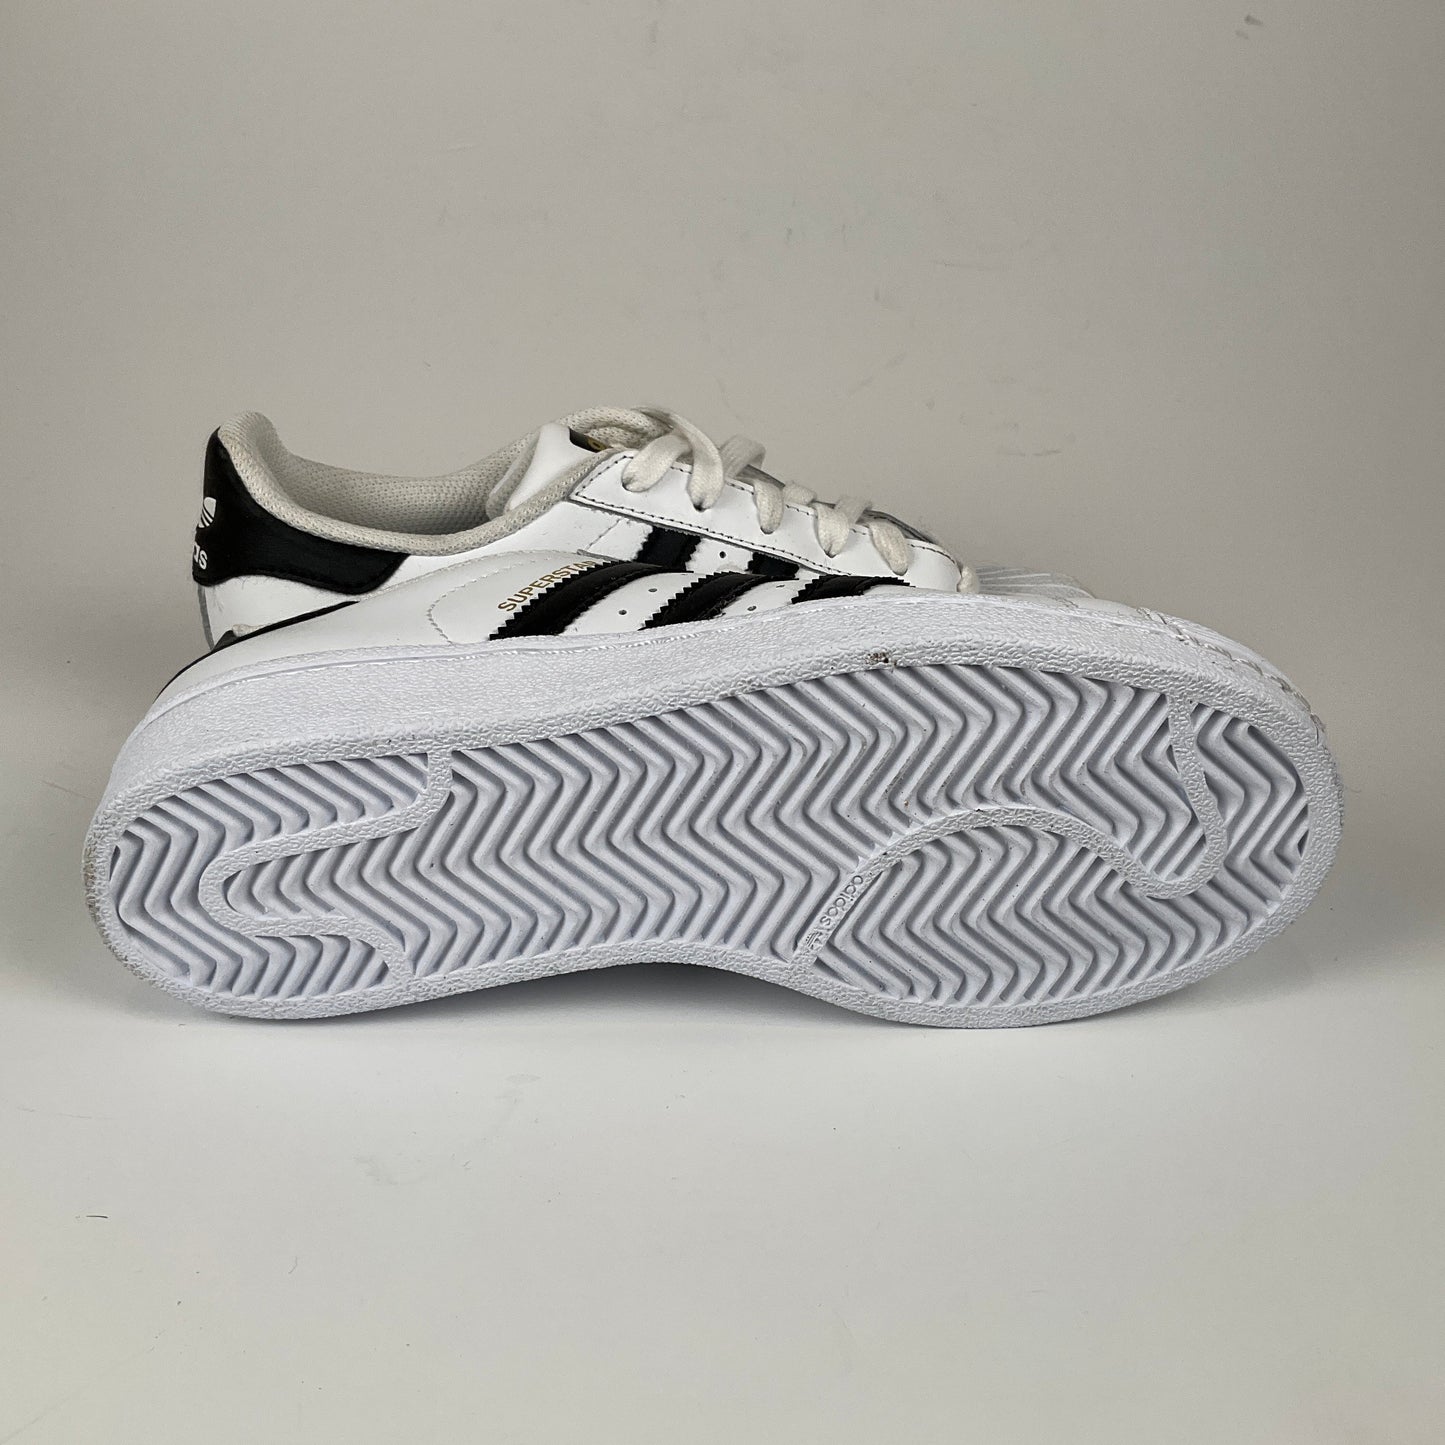 Adidas - Sneakers - Size 36 - Shoes